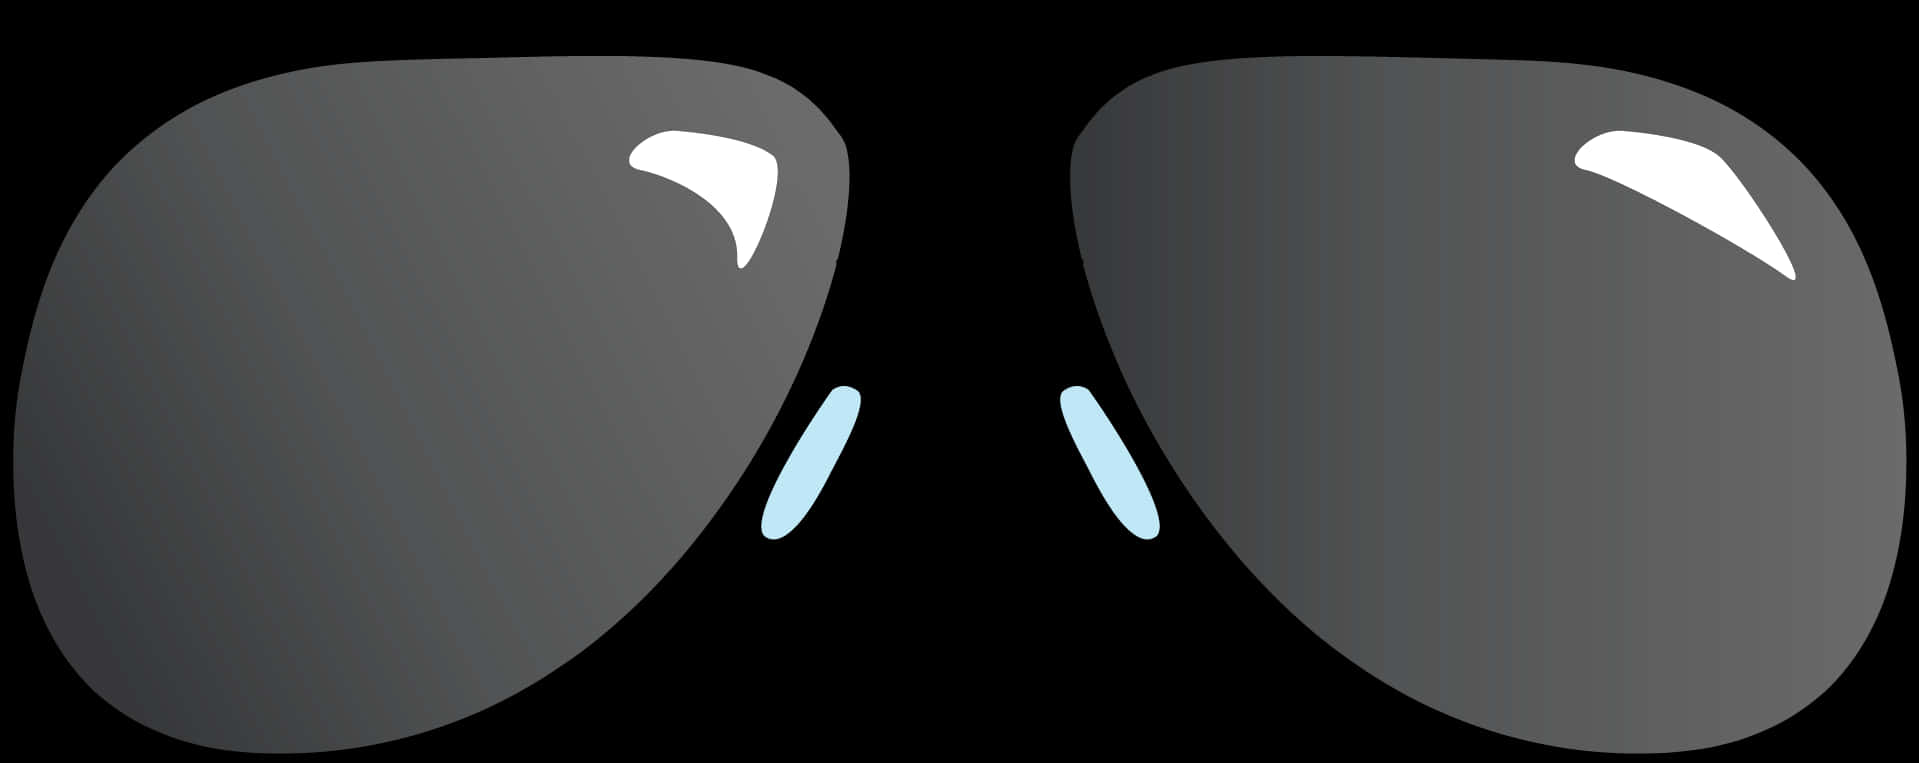 Stylized Sunglasses Graphic PNG image